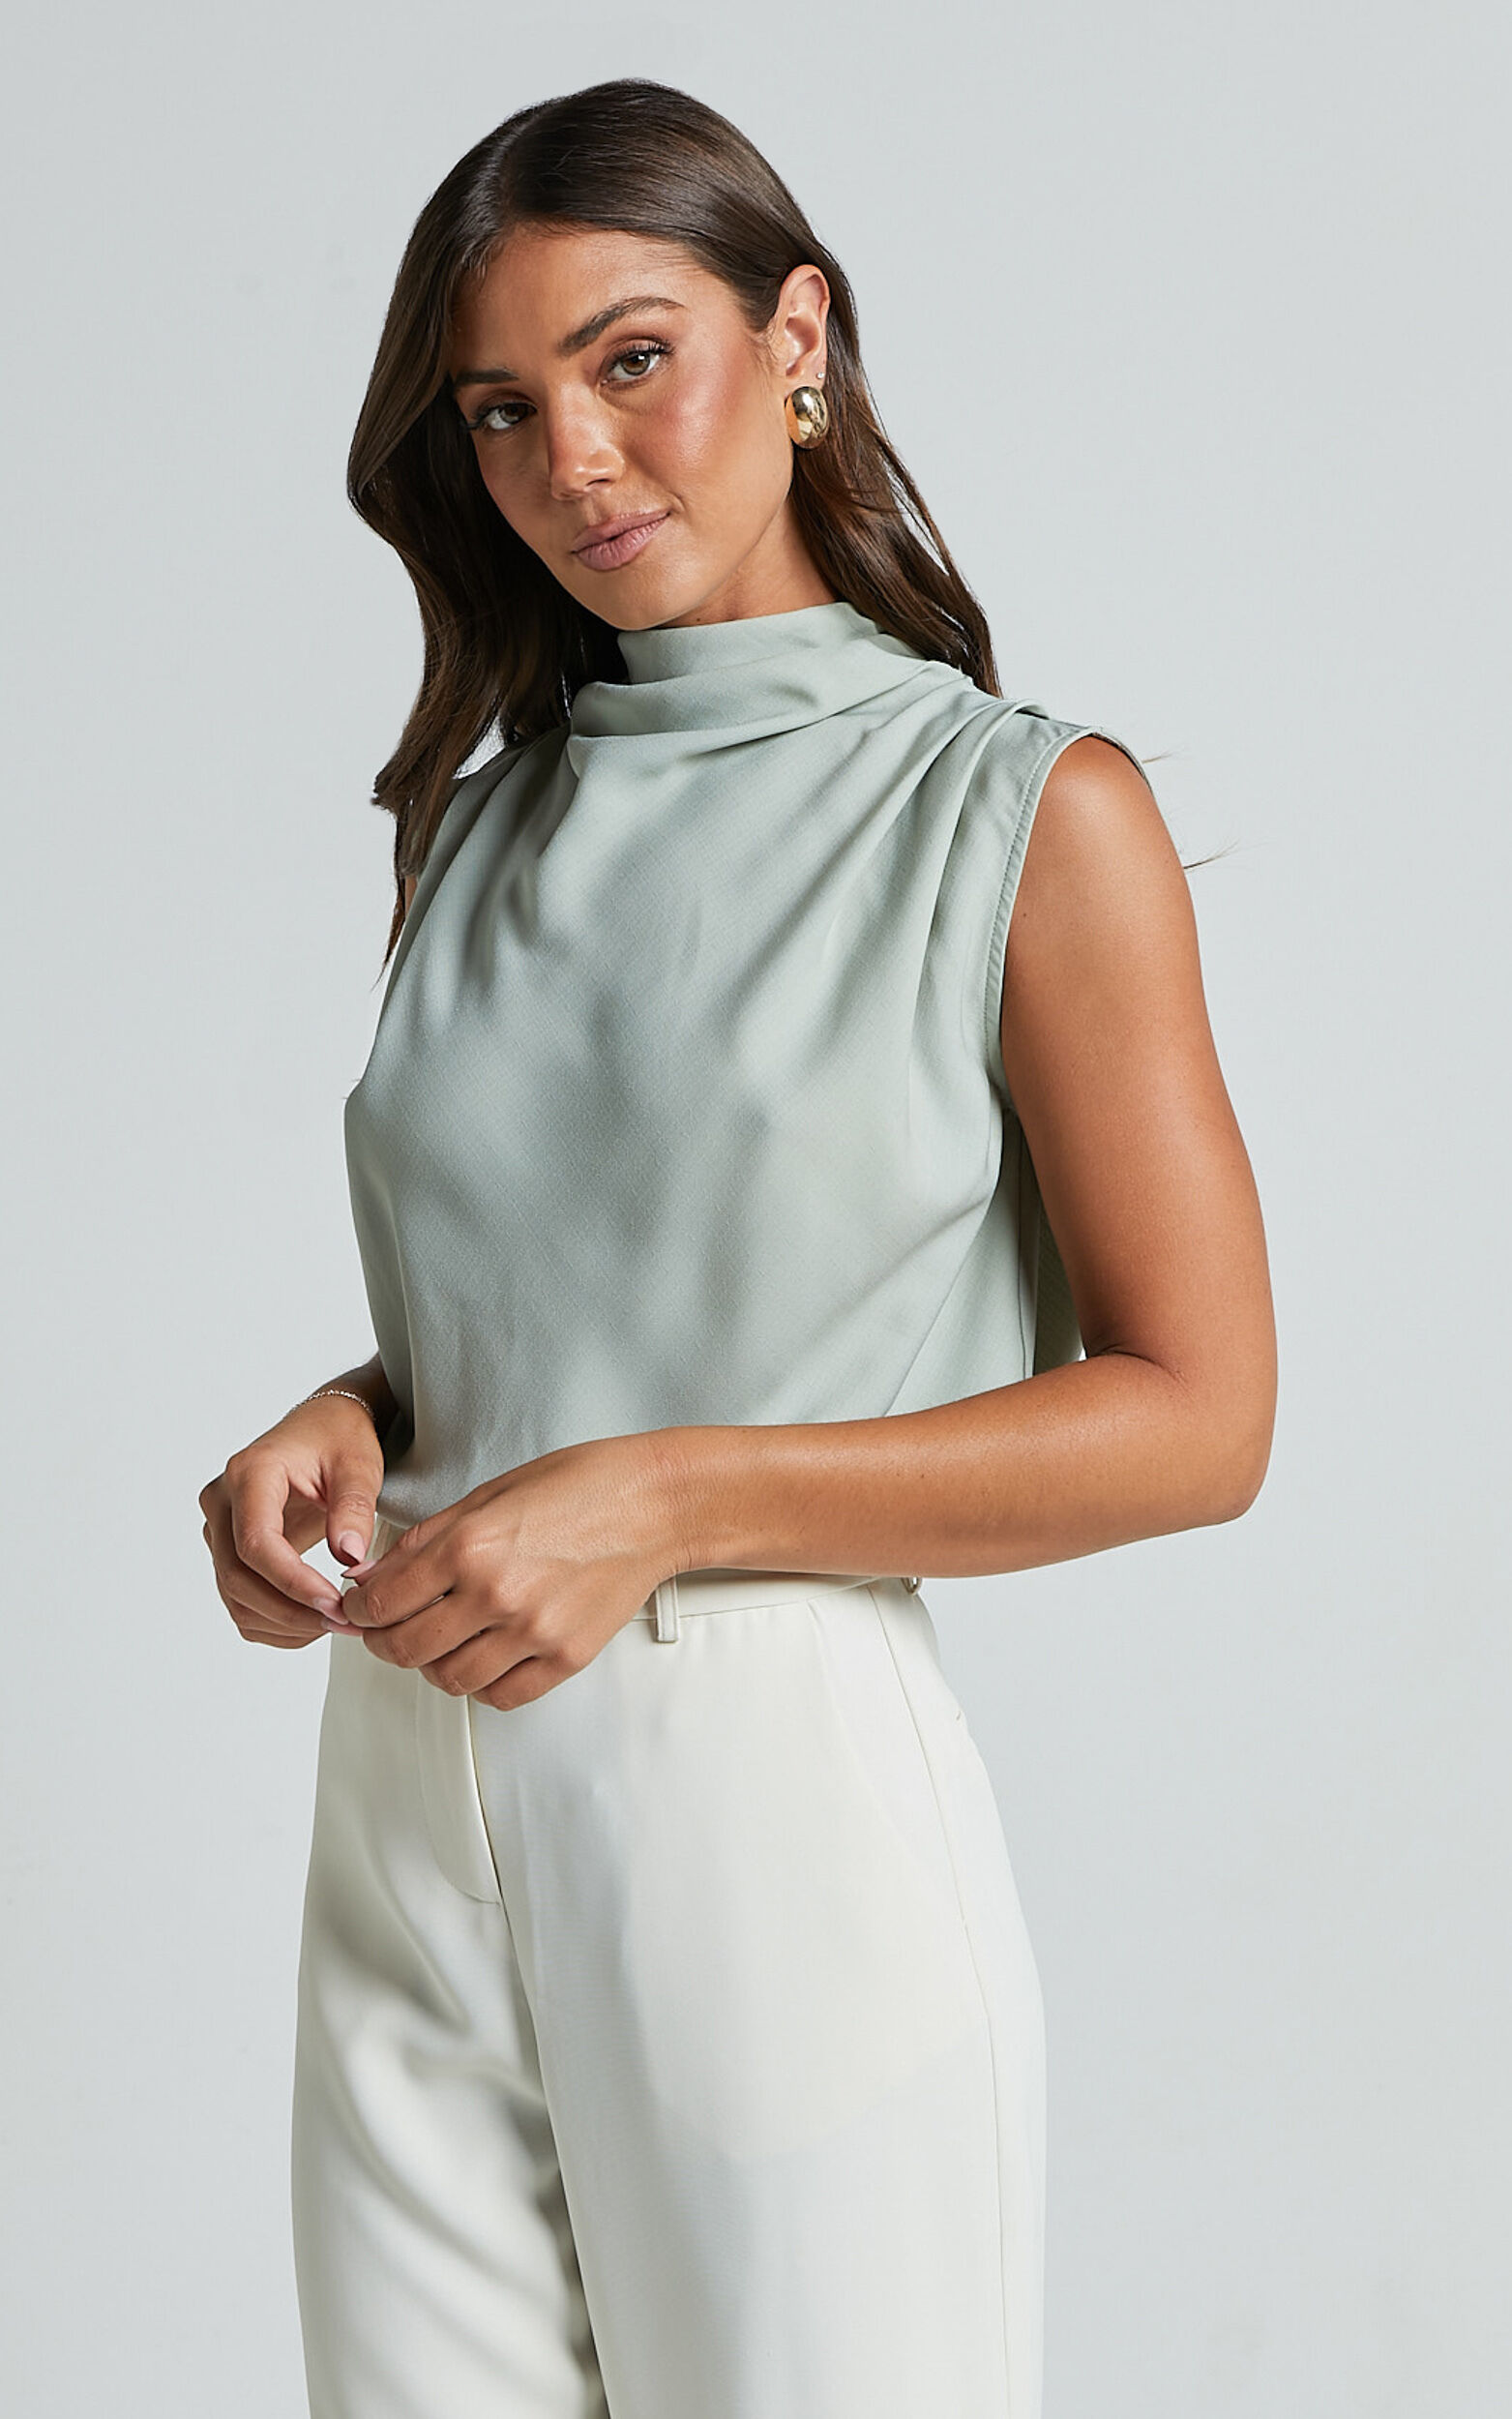 Arianae Top - High Neck Top in Sage - 06, GRN2